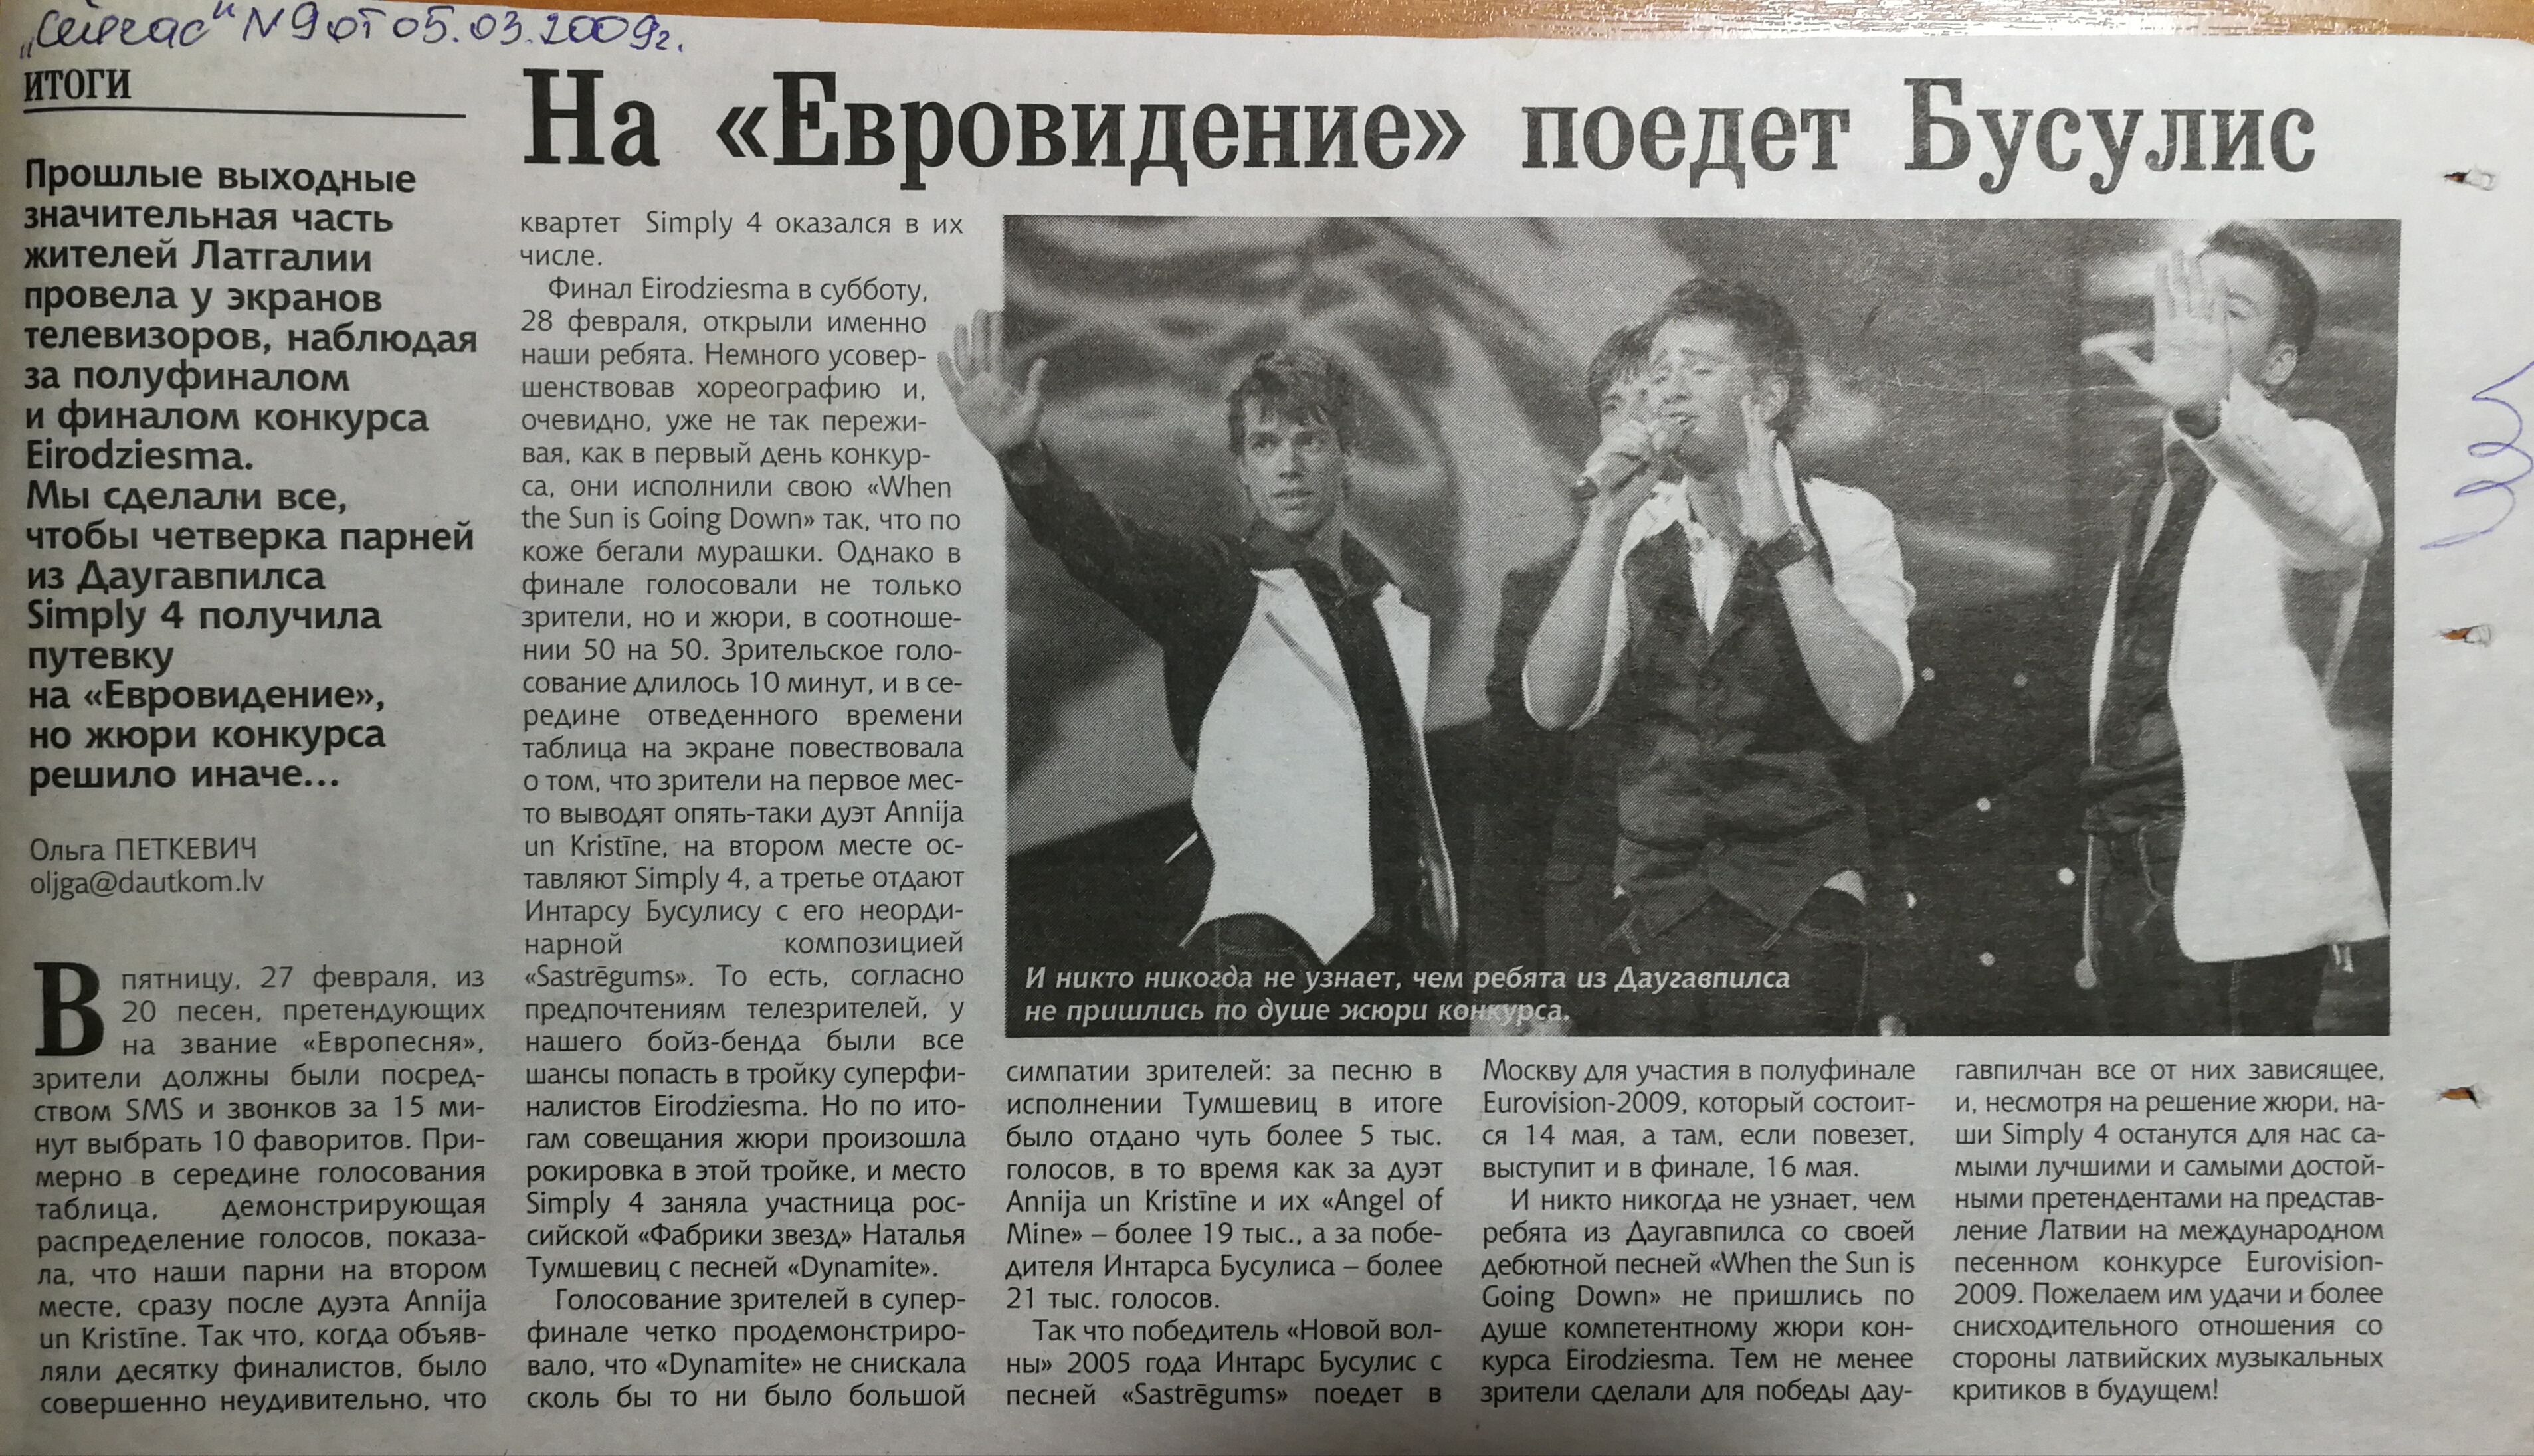 Simply 4 newspaper article, Eurovision 2009 results